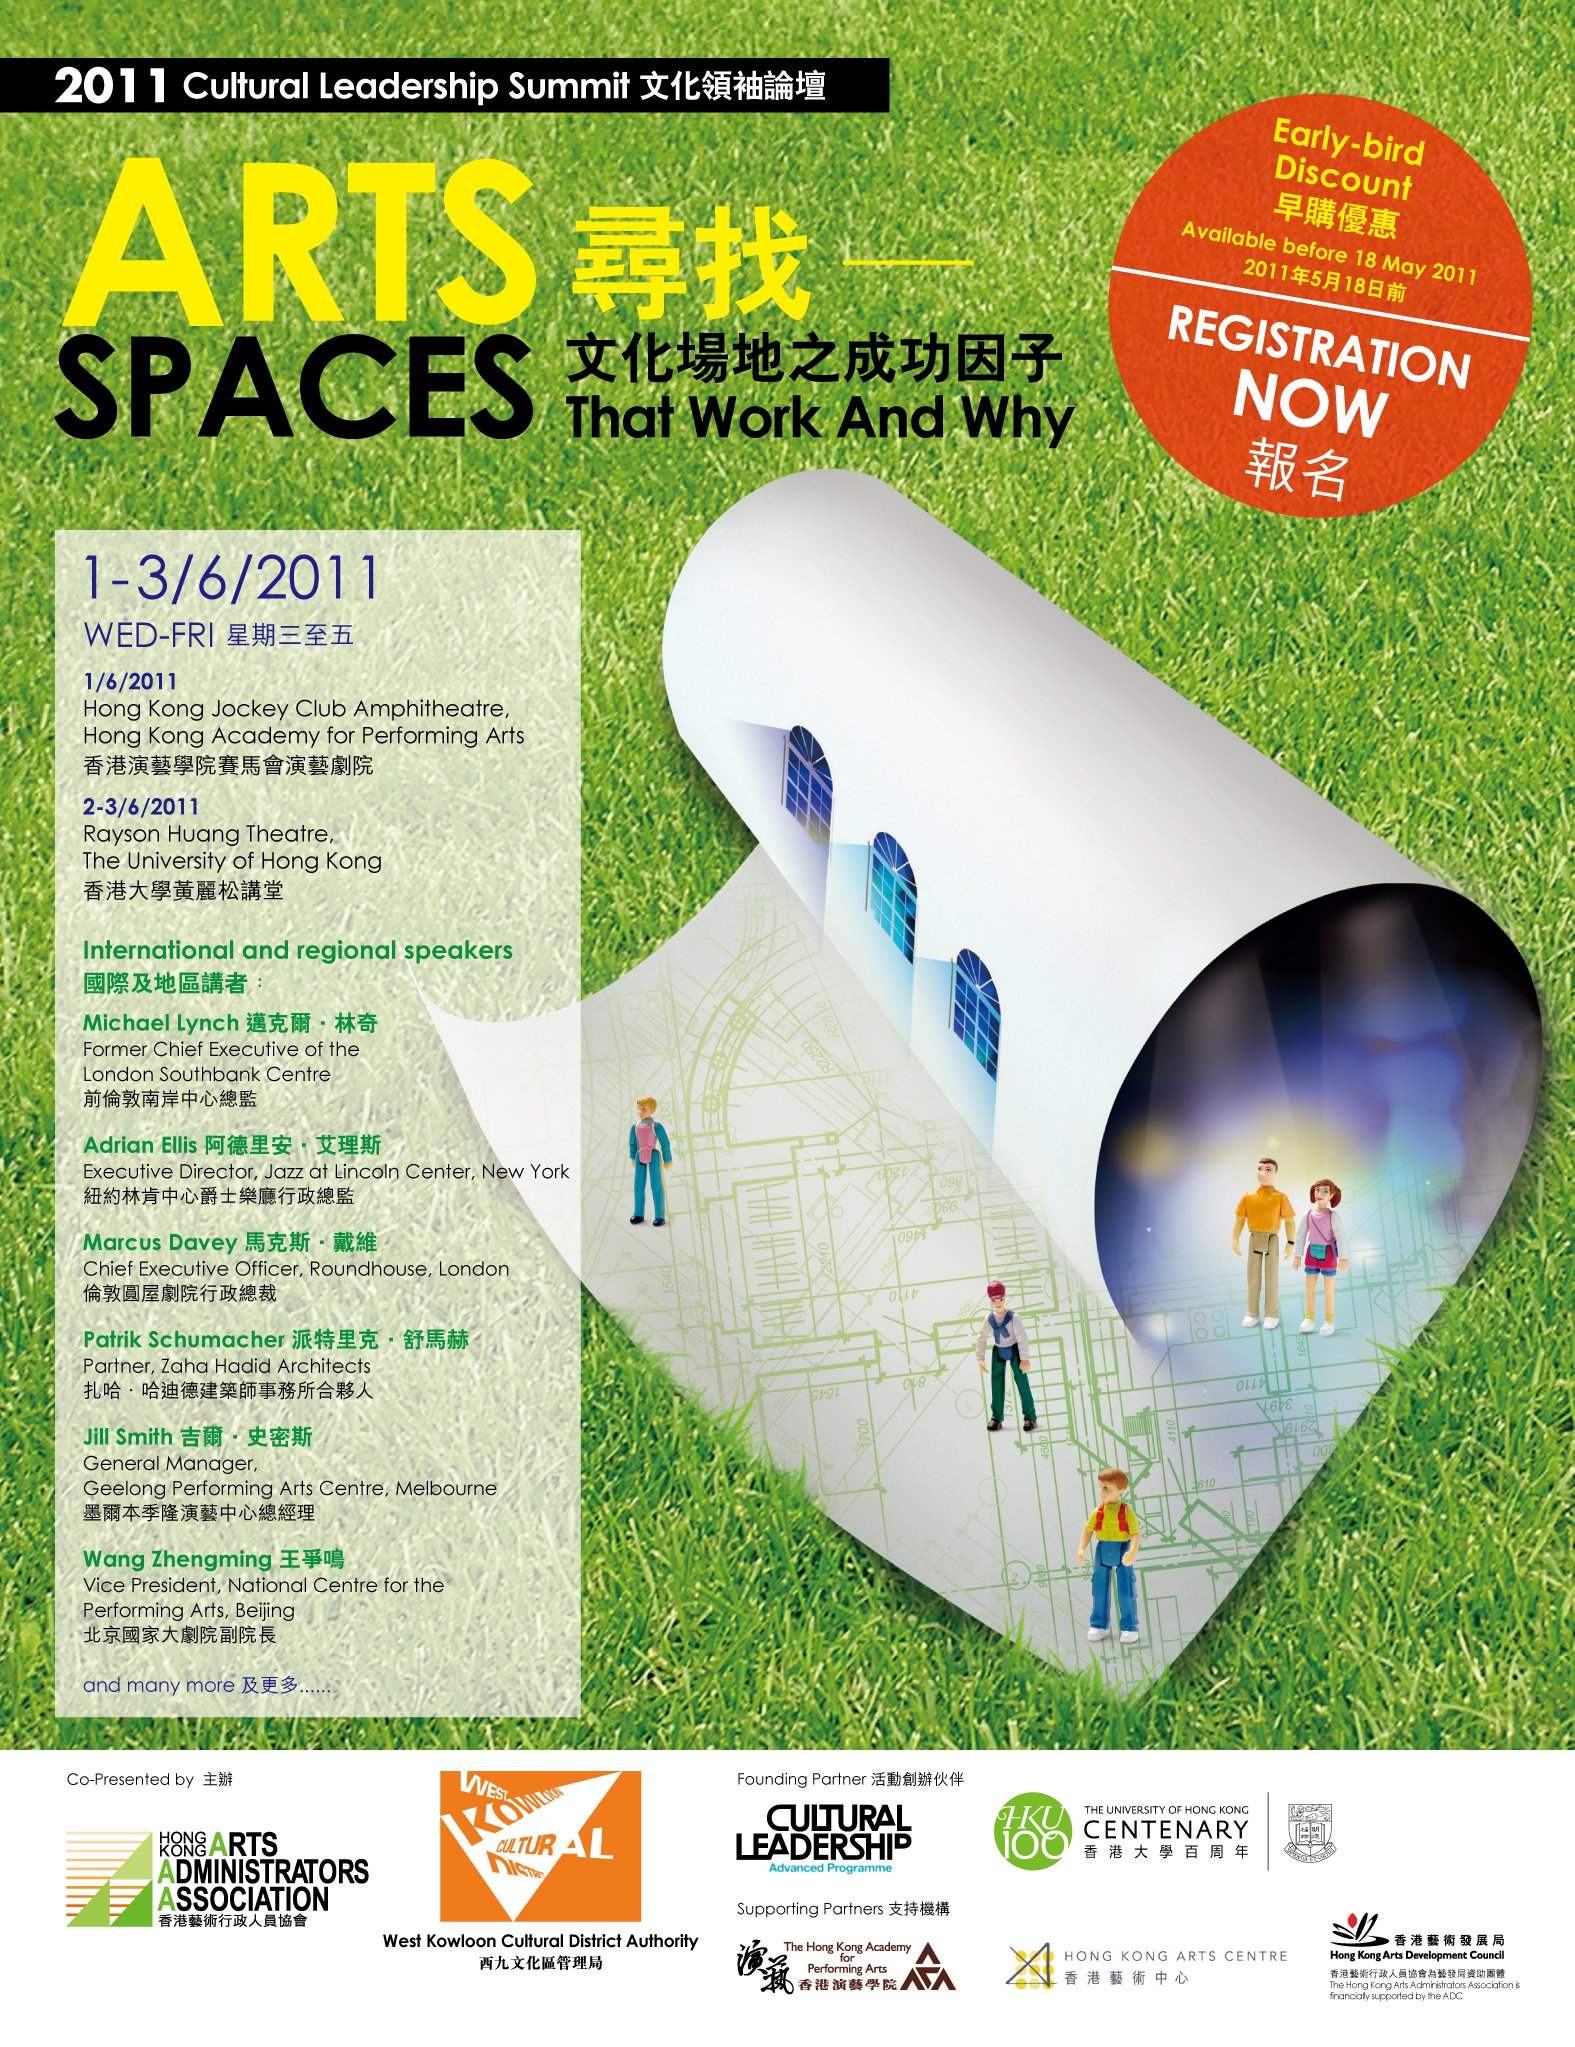 Cultural Leadership Summit 2011: Arts Spaces That Works, and Why